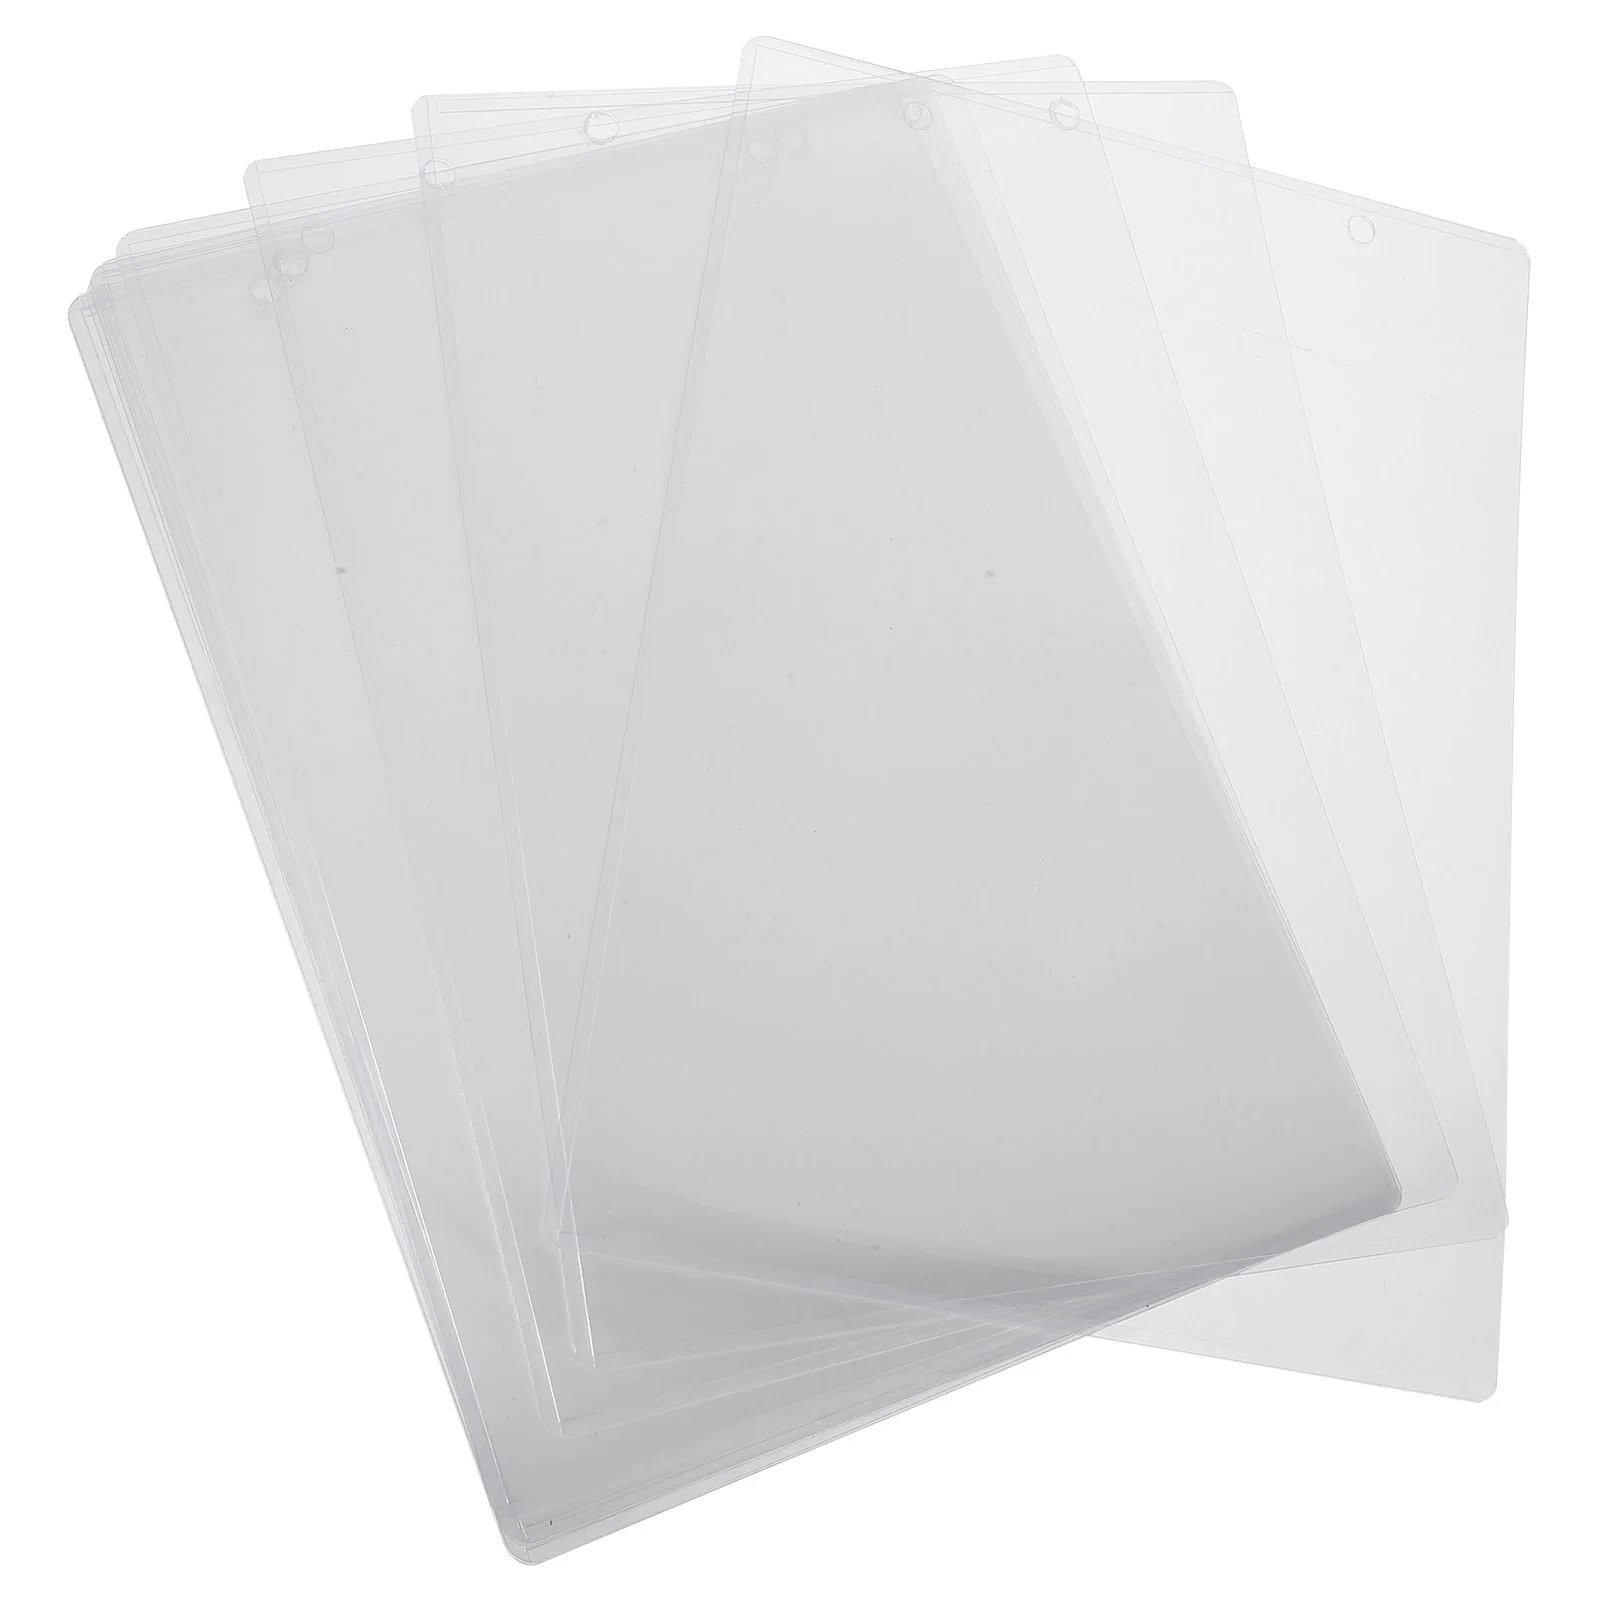 

Page Protectors Plastic Sleeves Documents Paper Protective Card Clear Magnetic Hooks